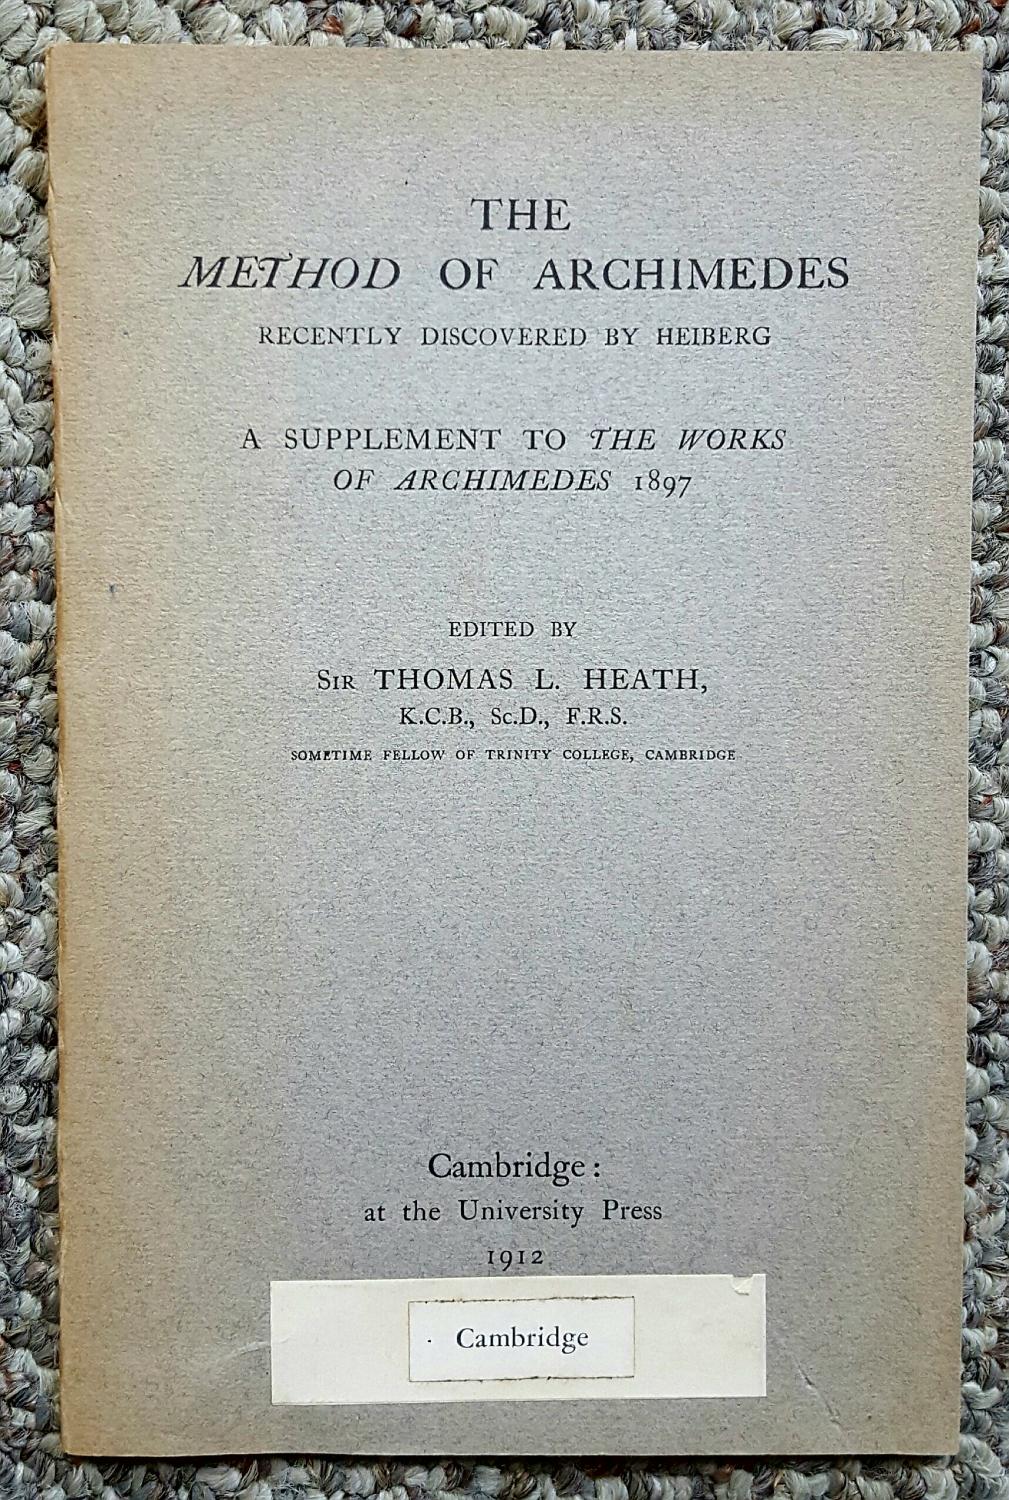 The Method of Archimedes, Recently Discovered by Heiberg. A Supplement to the Works of Archimedes, 1897. - ARCHIMEDES; HEIBERG, J. L. [Johan Ludvig] (1854-1928); HEATH, Thomas L. (ed.)